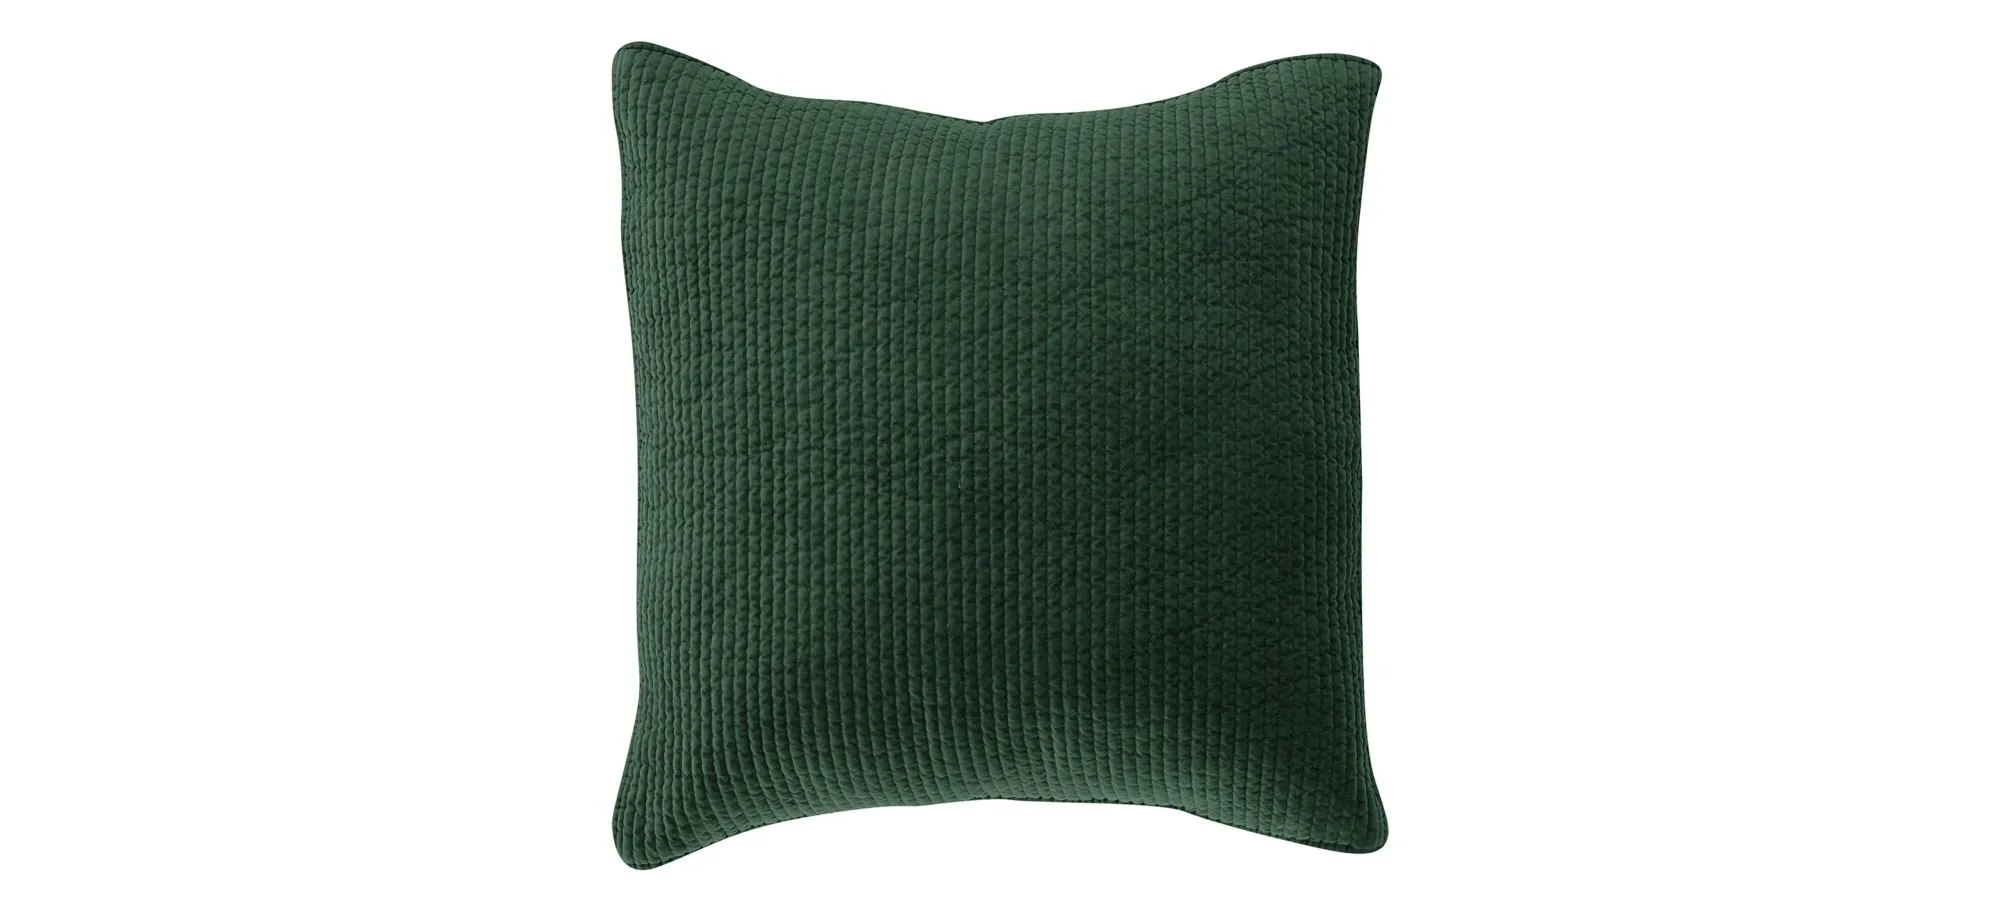 Stonewashed Cotton Velvet Quilted Sham in Emerald by HiEnd Accents